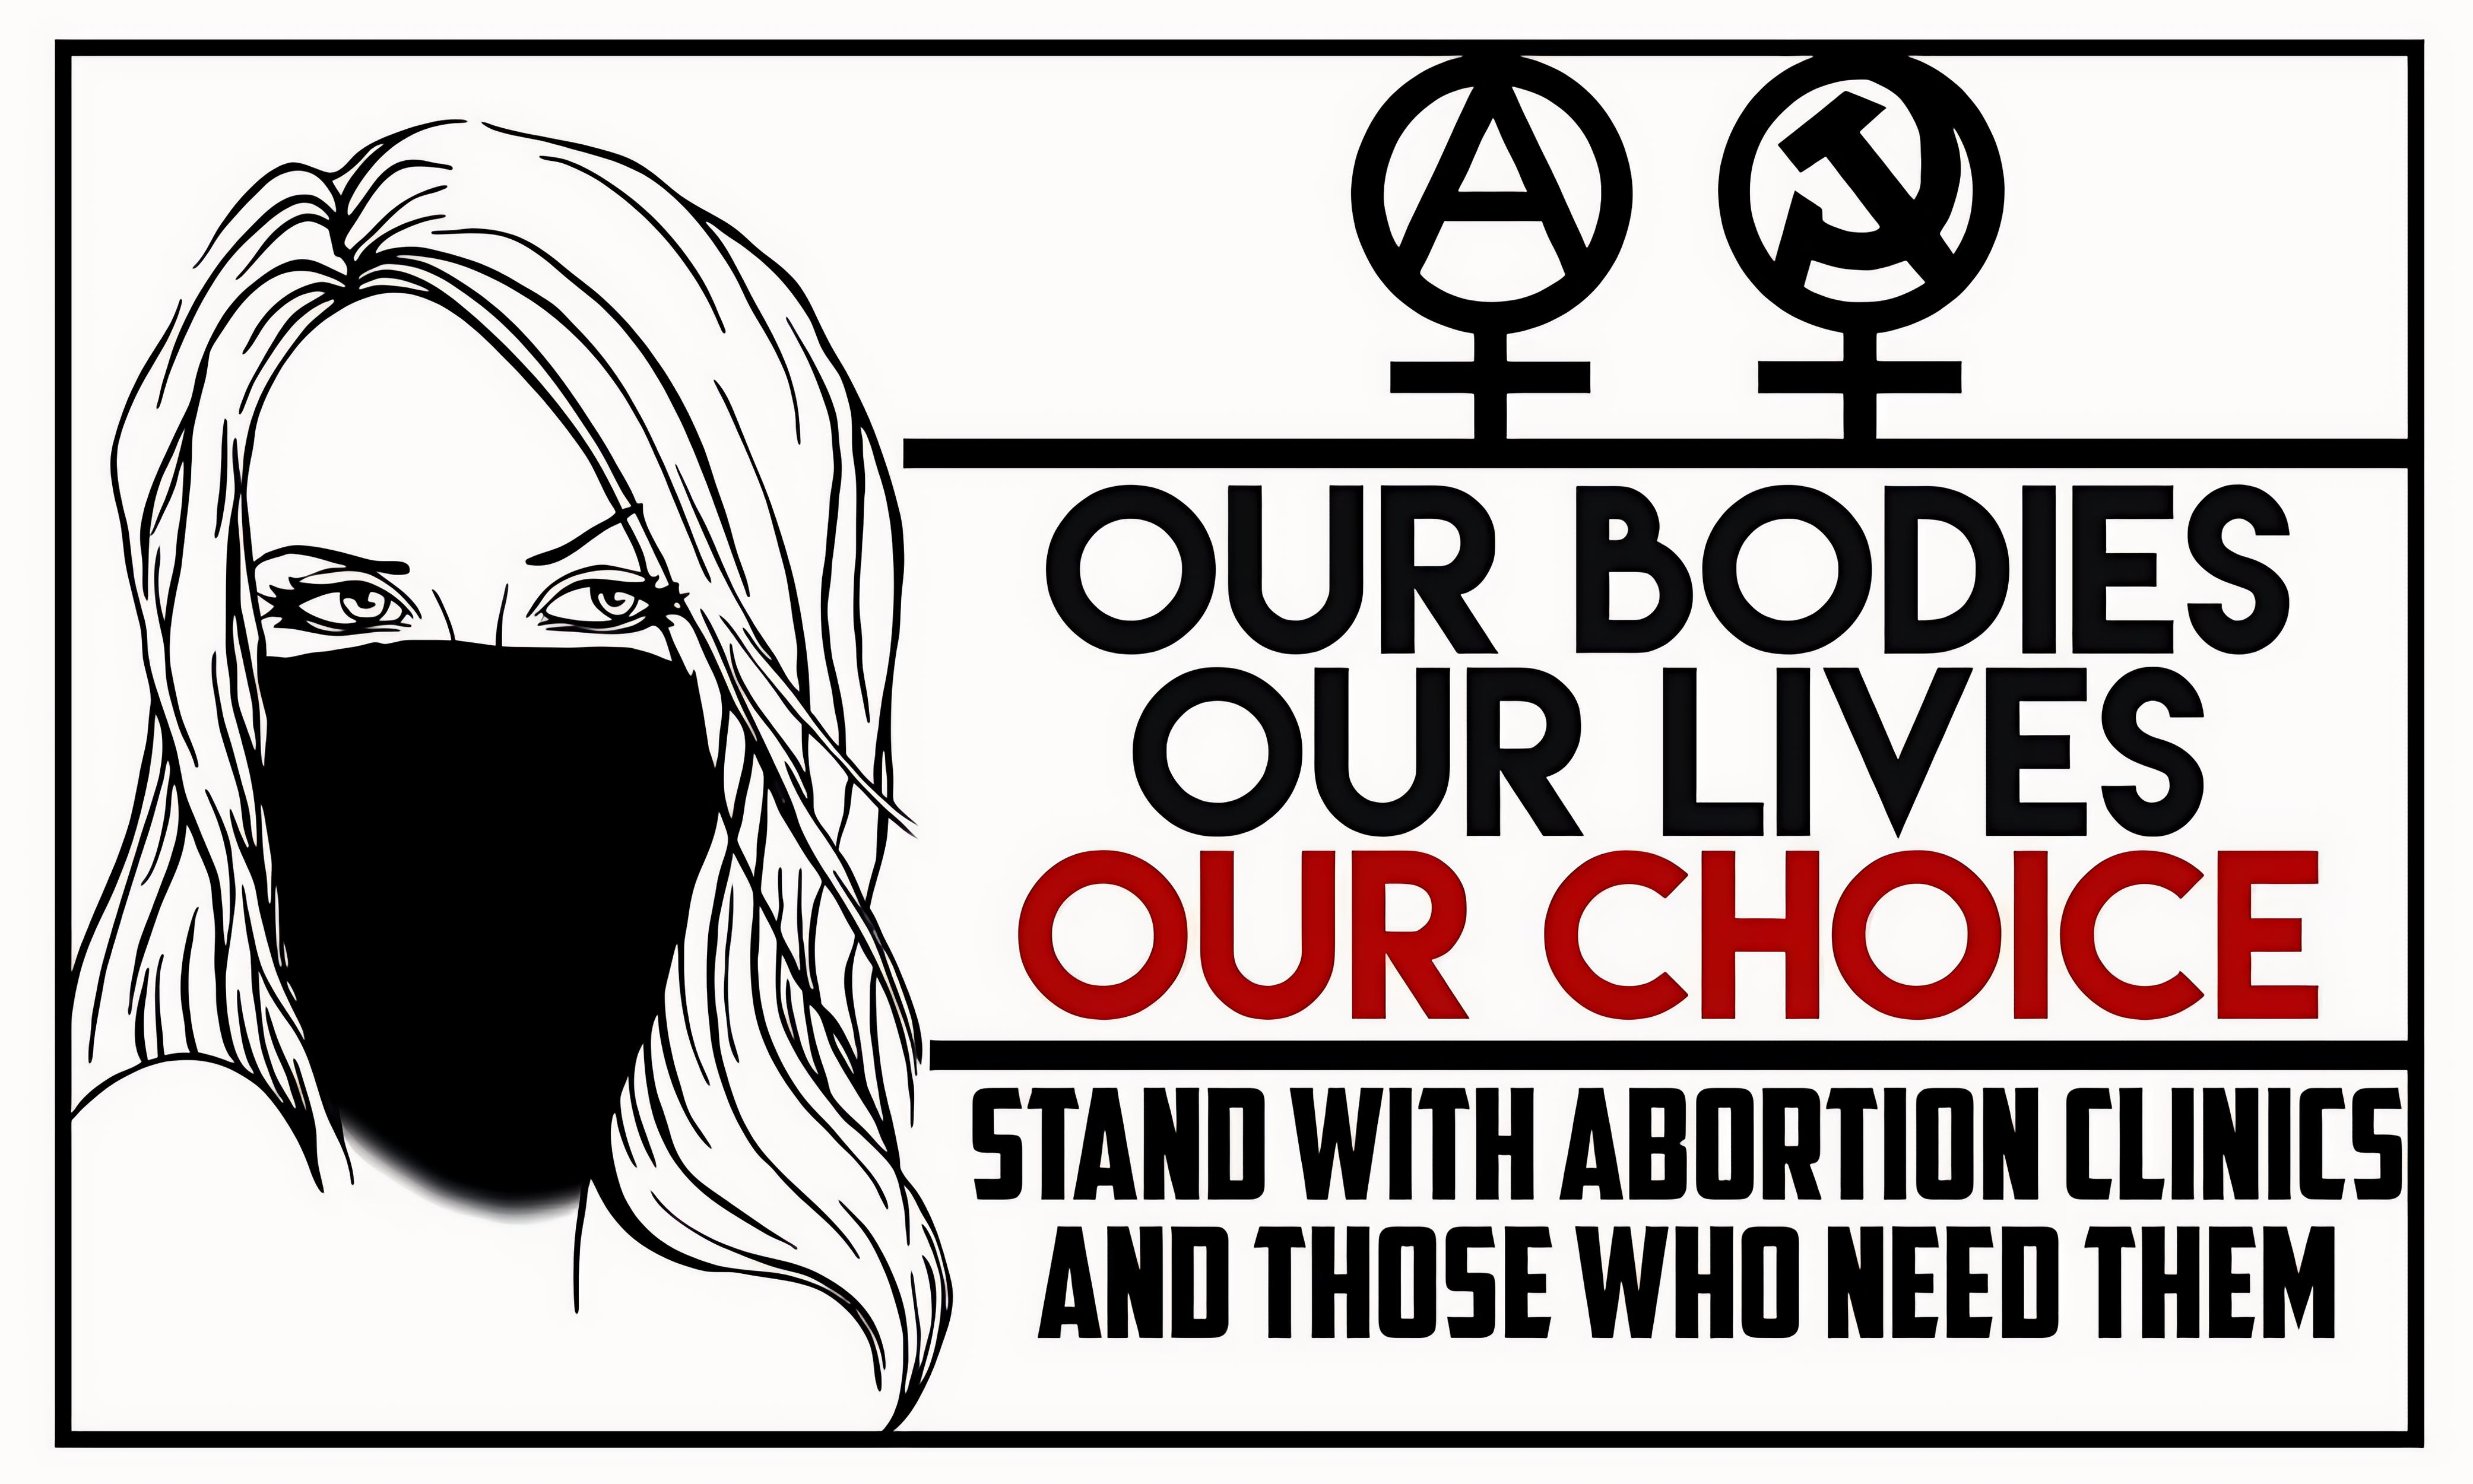 Our bodies, our lives, our choice